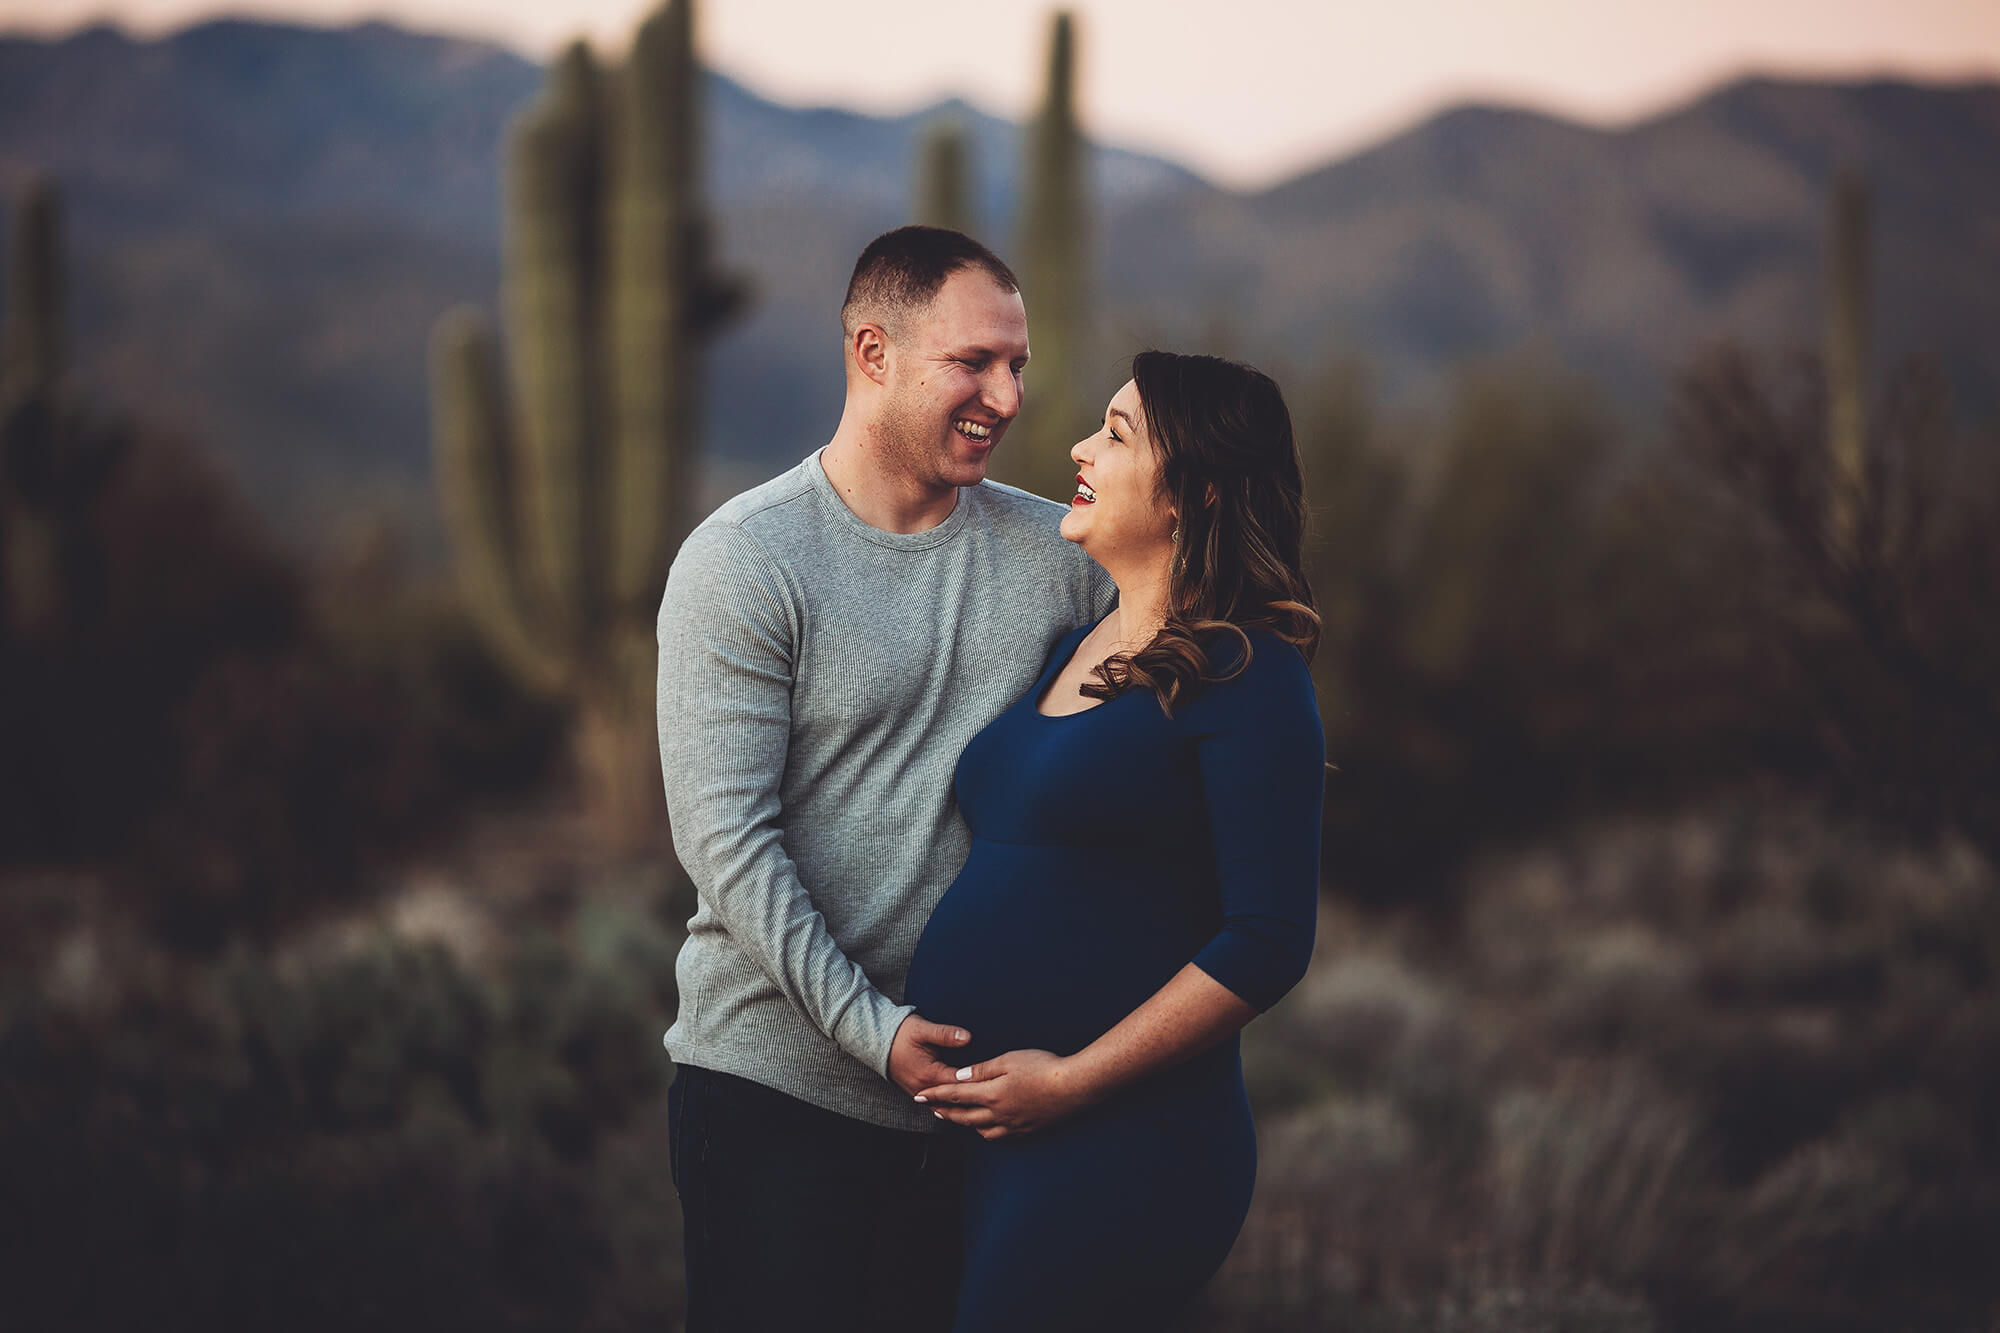 A bit of laughter during their maternity session.